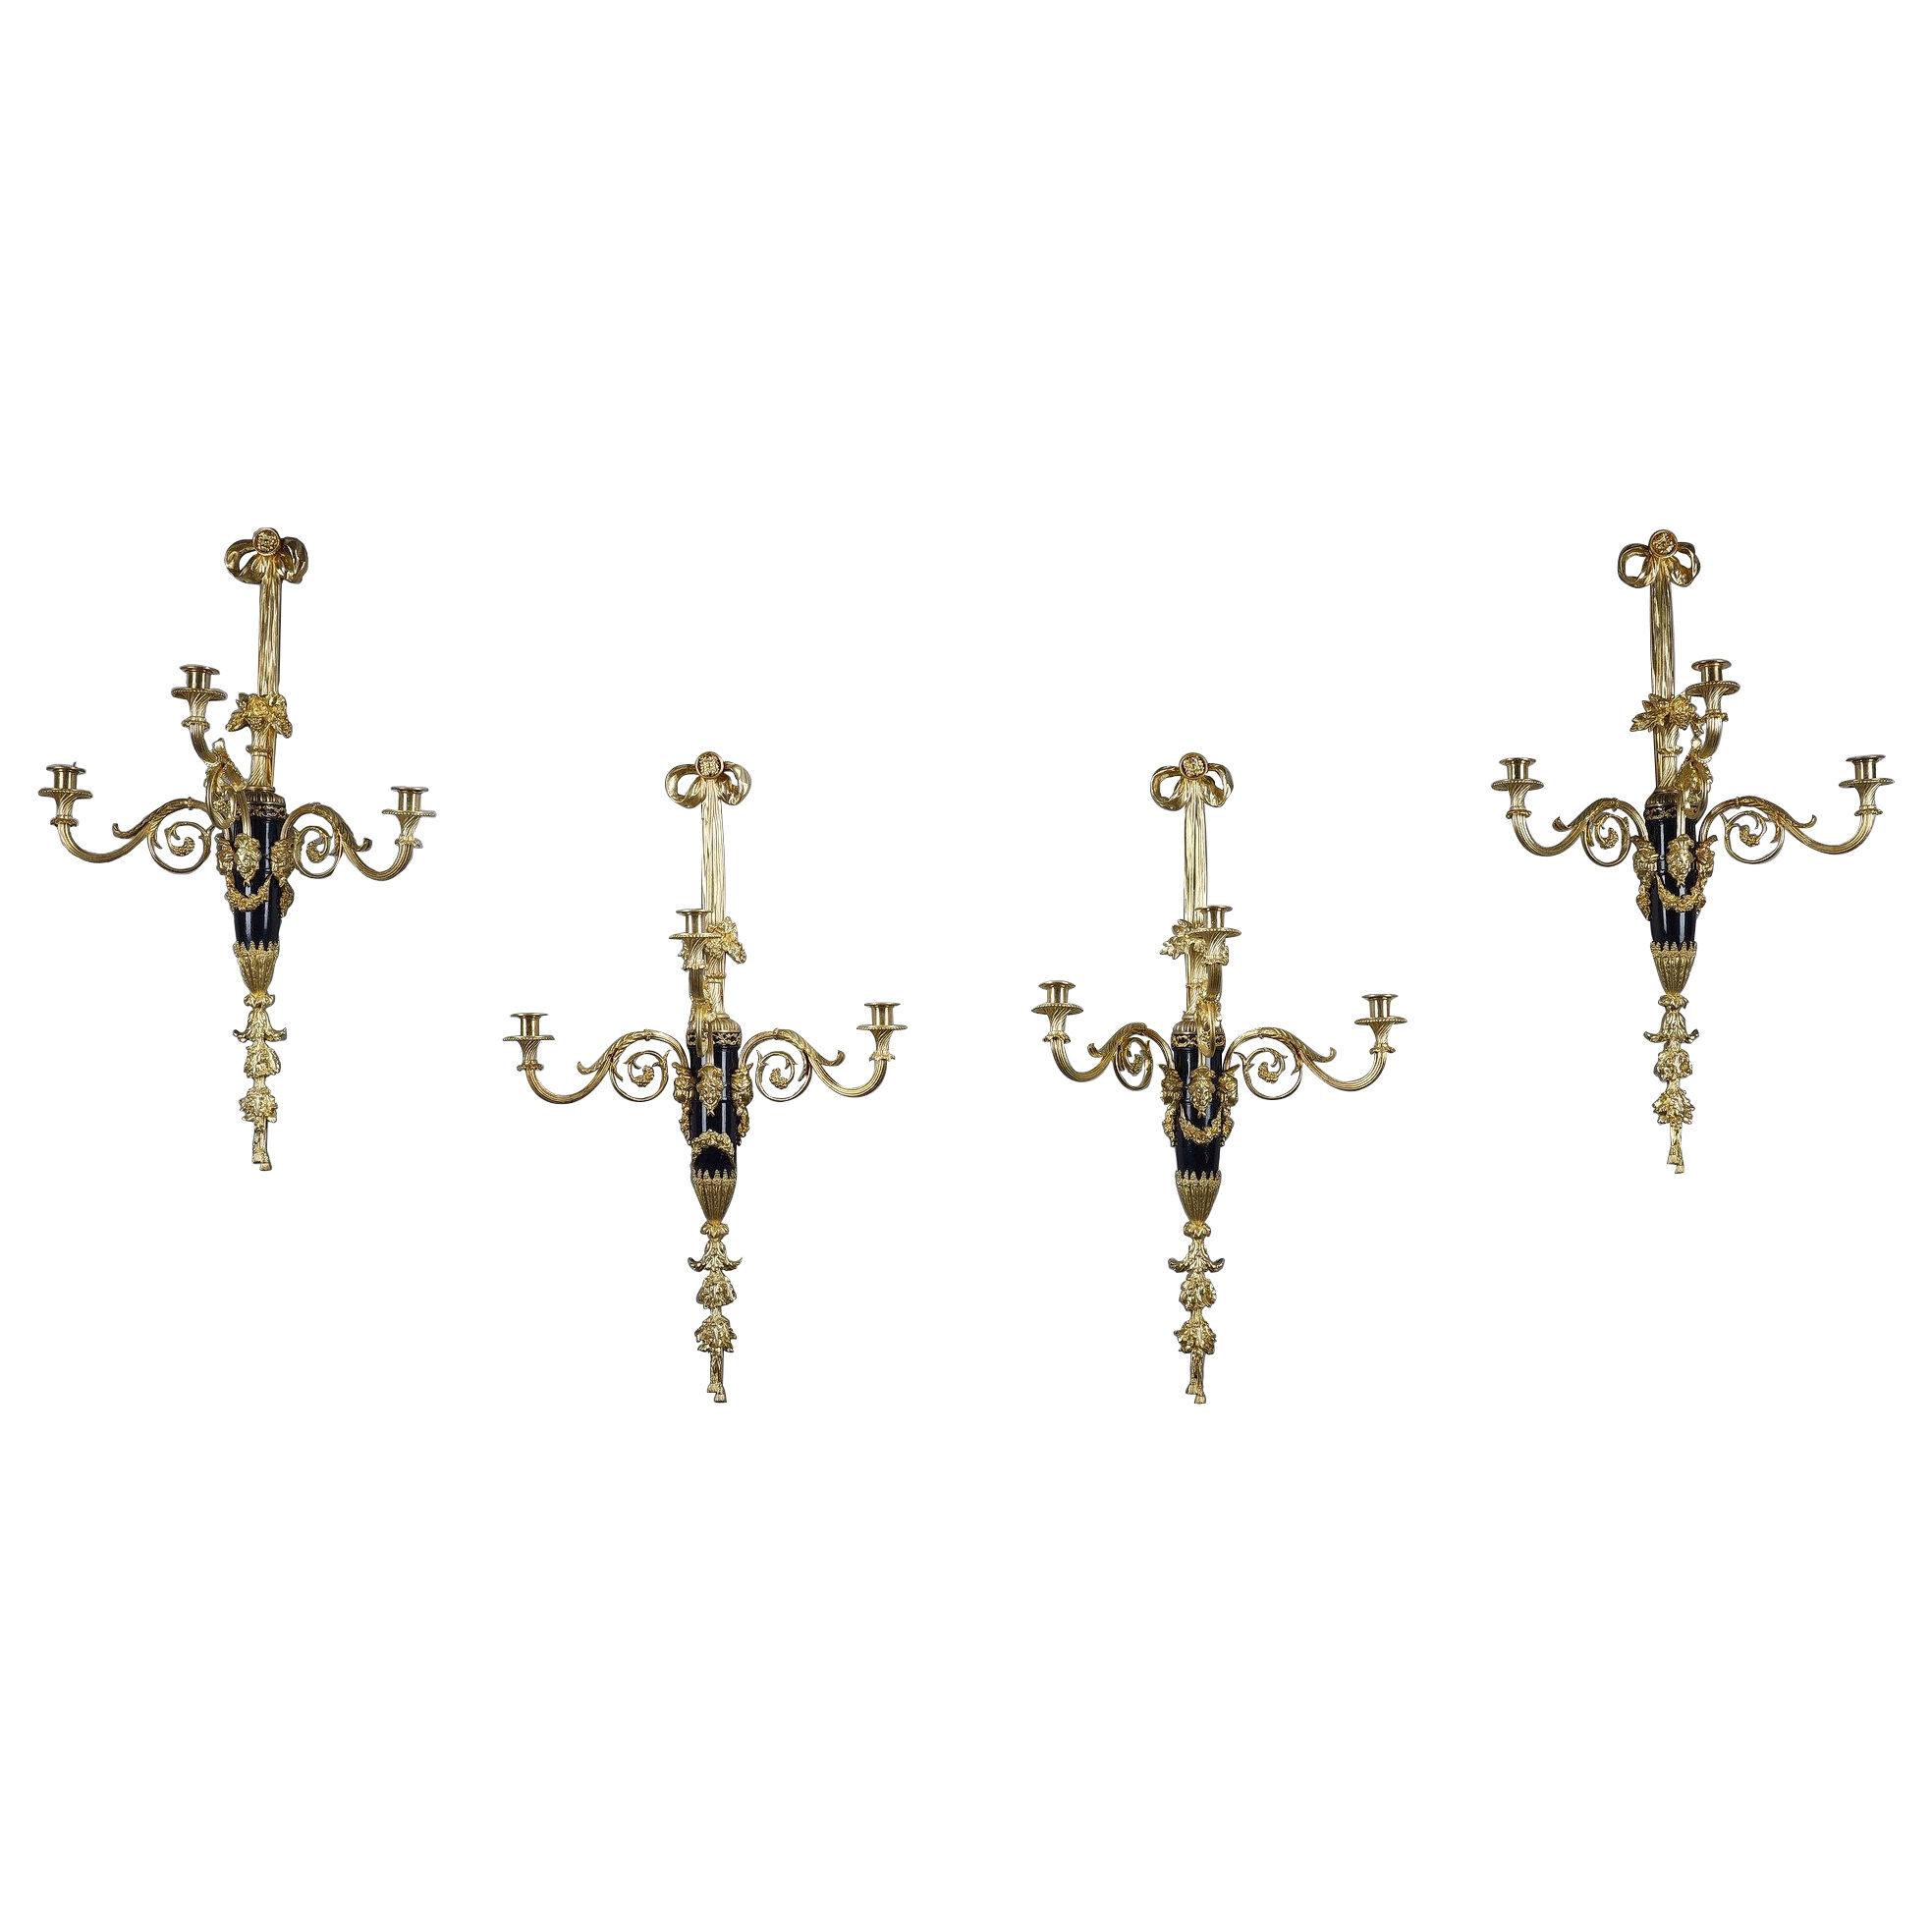 Set of four ormulu sconces in the Louis XVI style